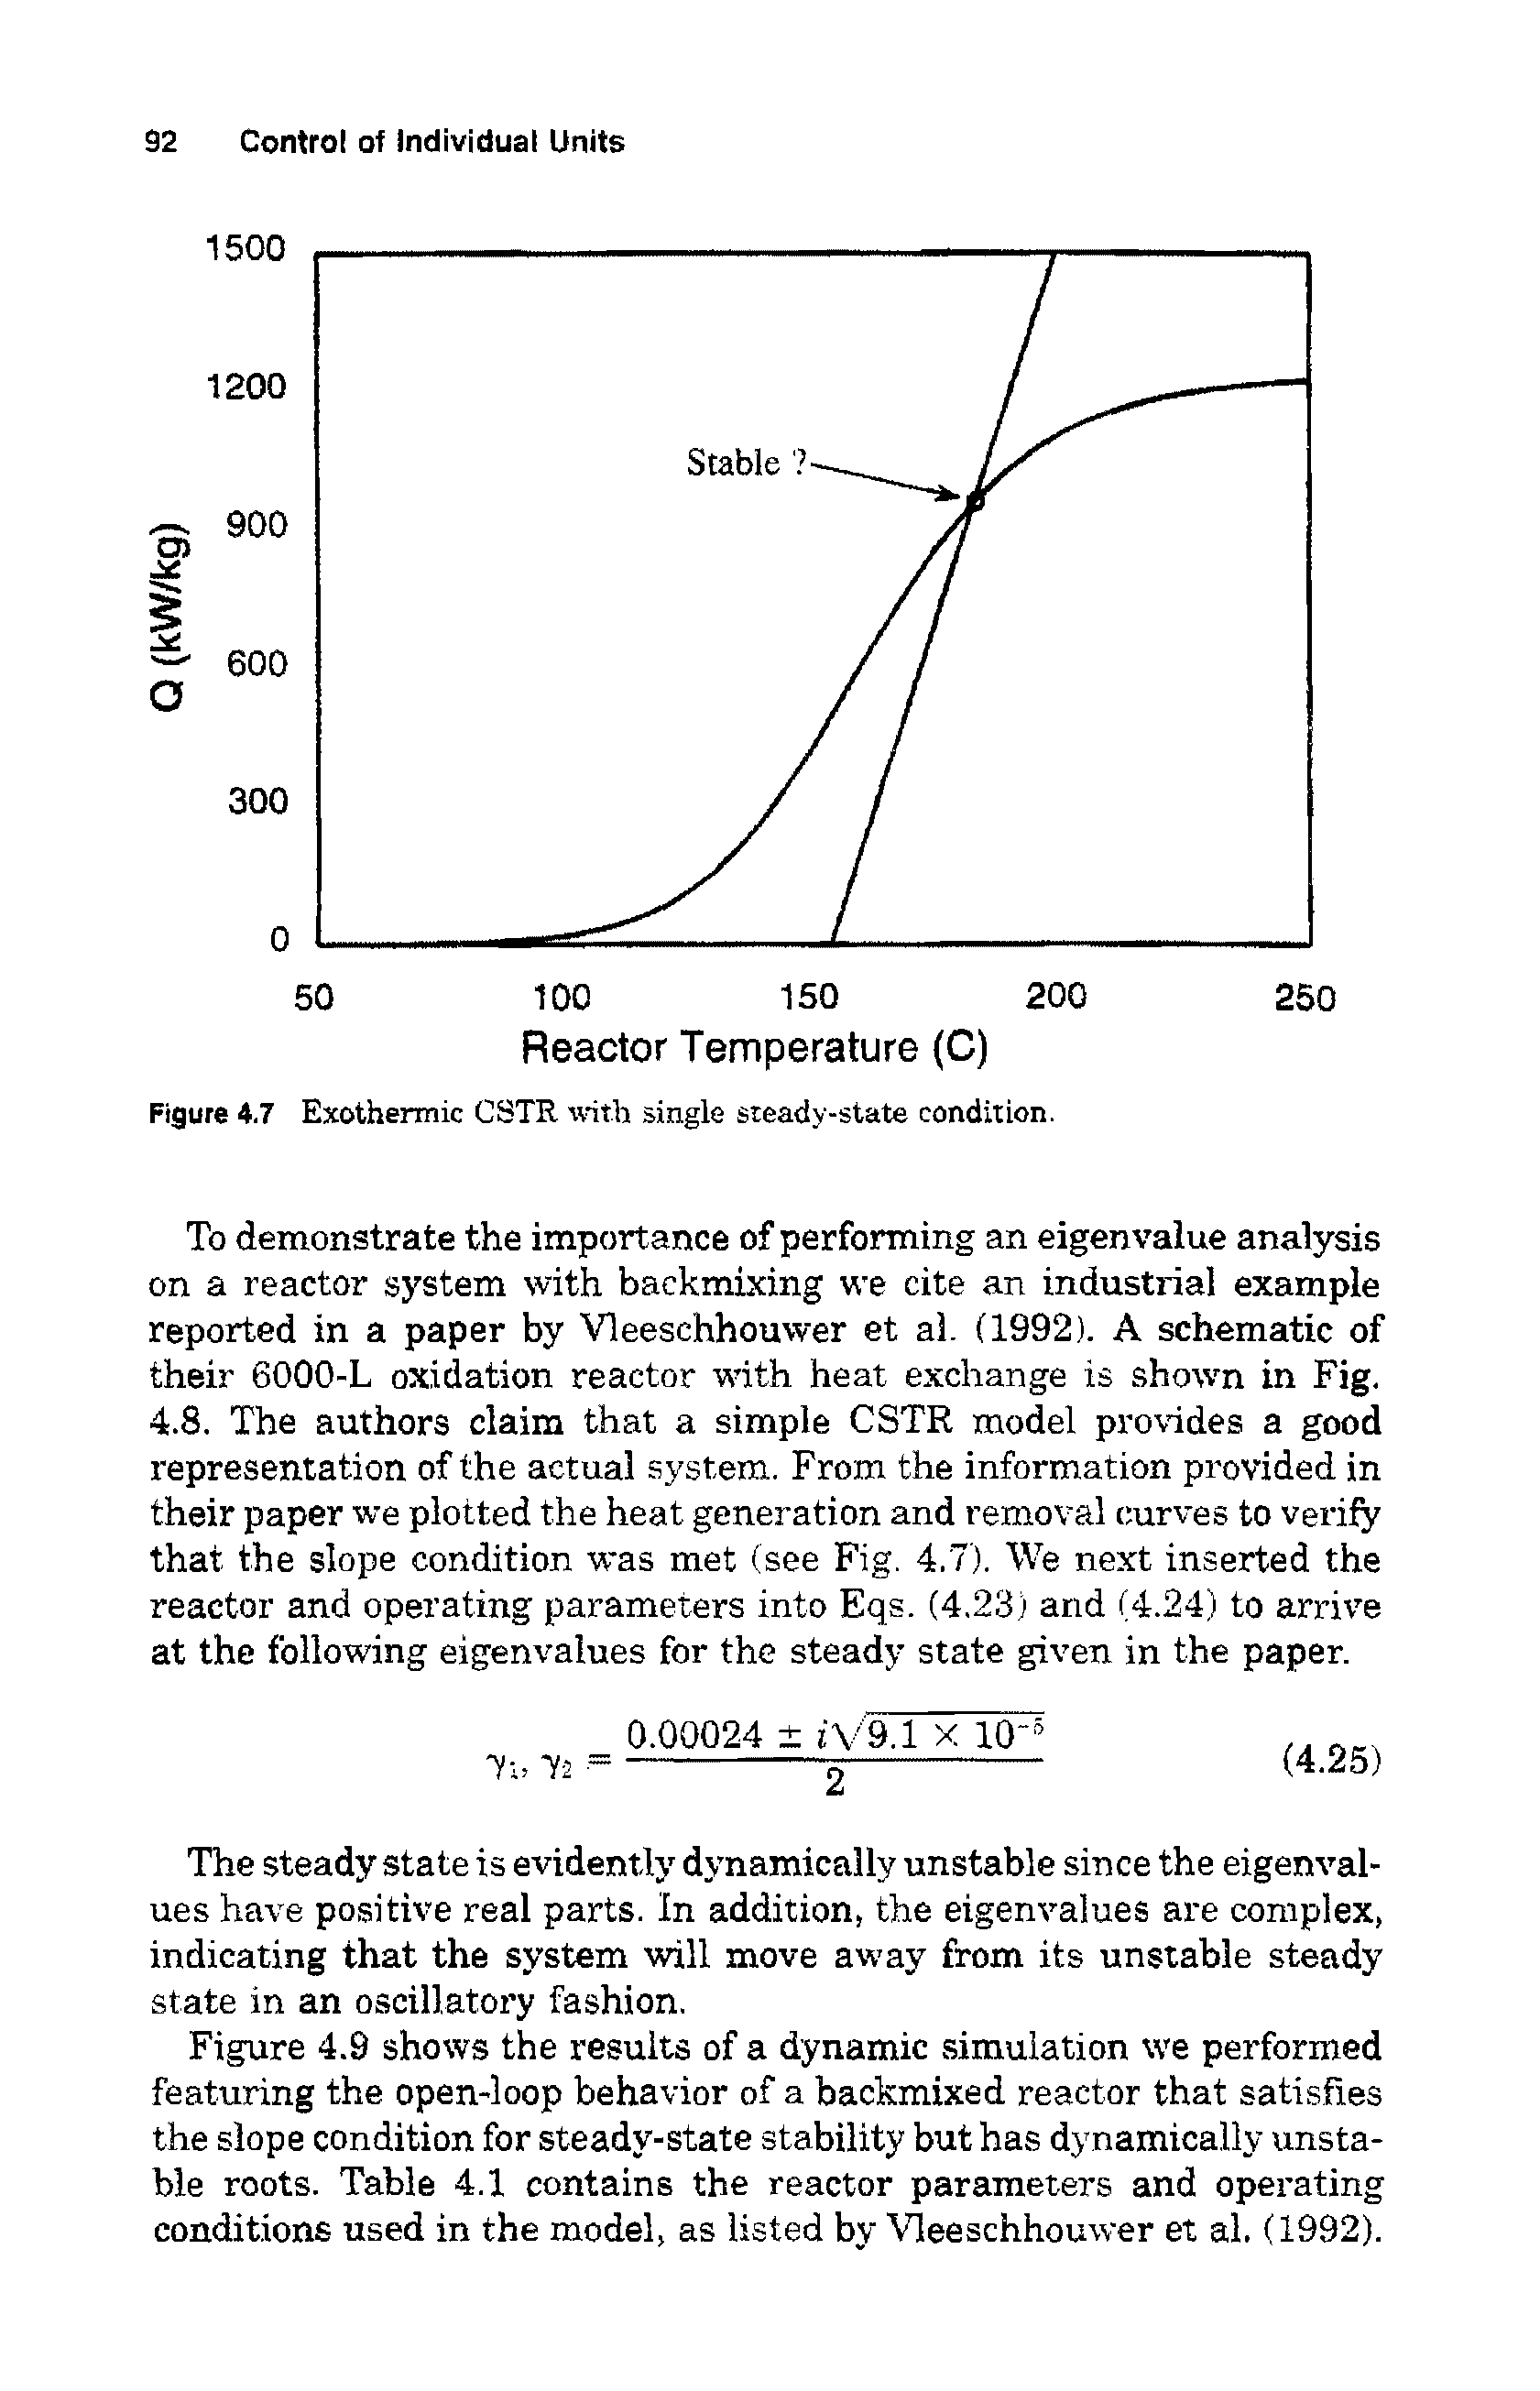 Figure 4.7 Exothermic CSTR with single steady-state condition.